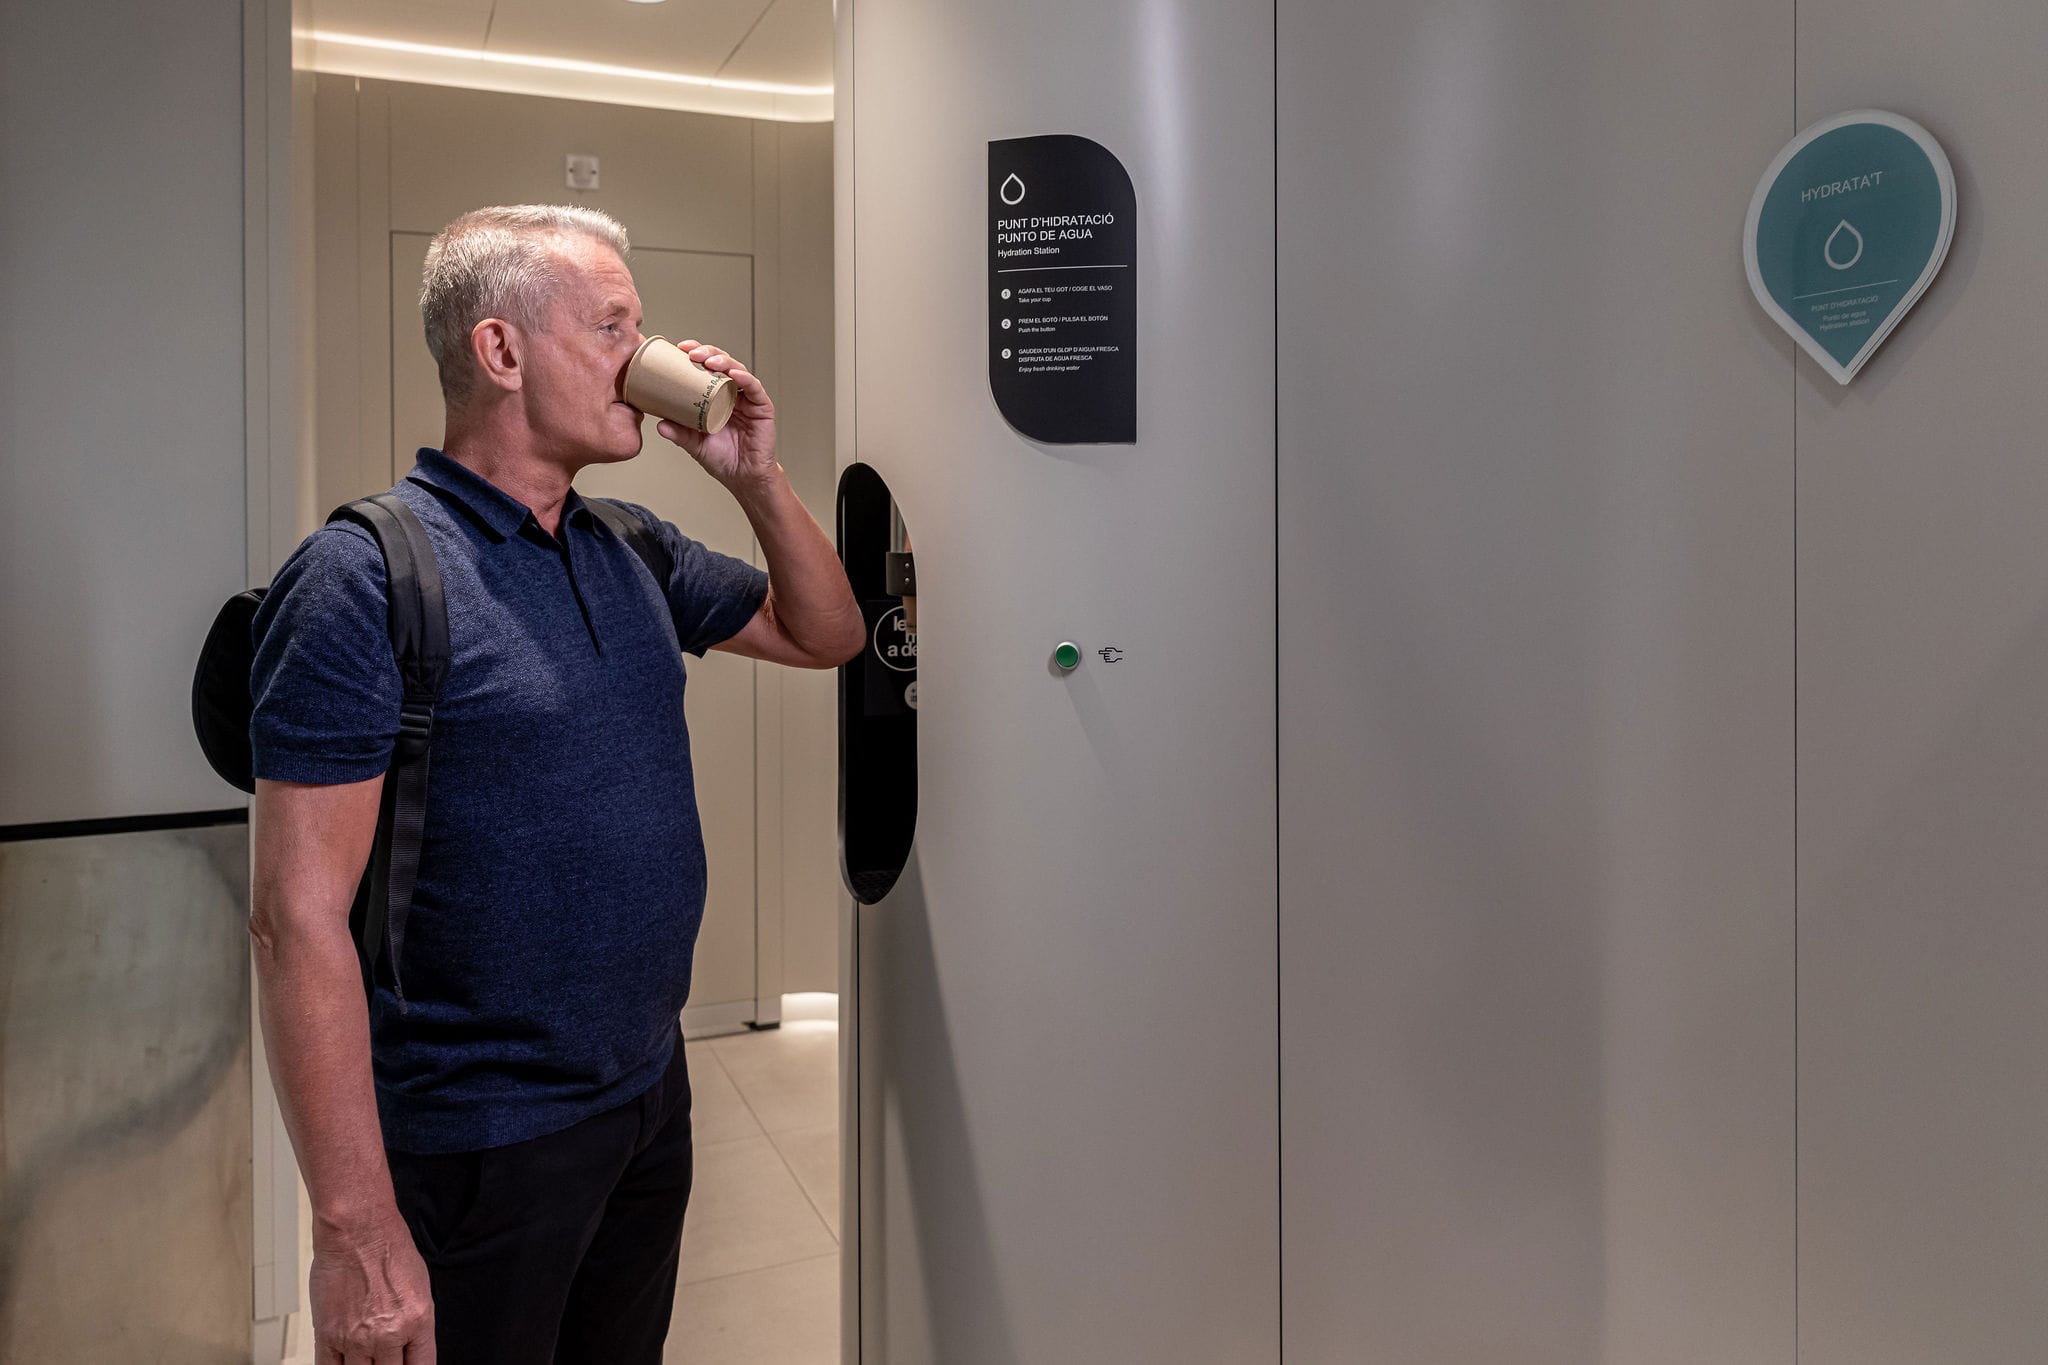 Kamleon CEO, Jordi Ferré explains the bottom line of these new urinals, which is to raise awareness and remind users of the importance of drinking regularly to improve well-being, health, and prevent possible diseases linked to lack of hydration.